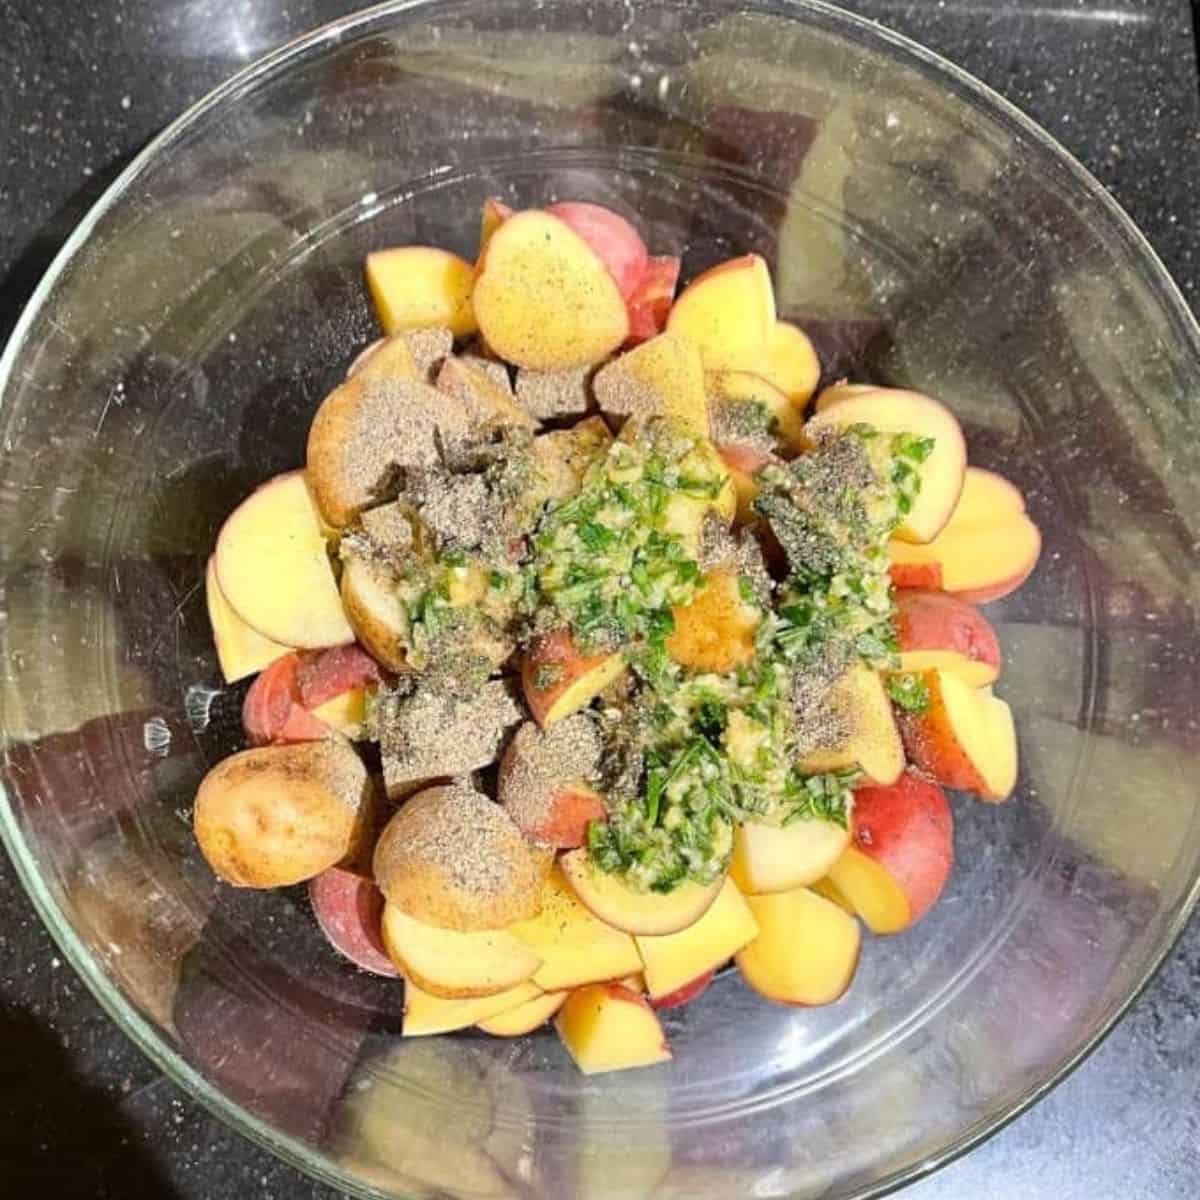 Marinade added to potatoes in bowl.